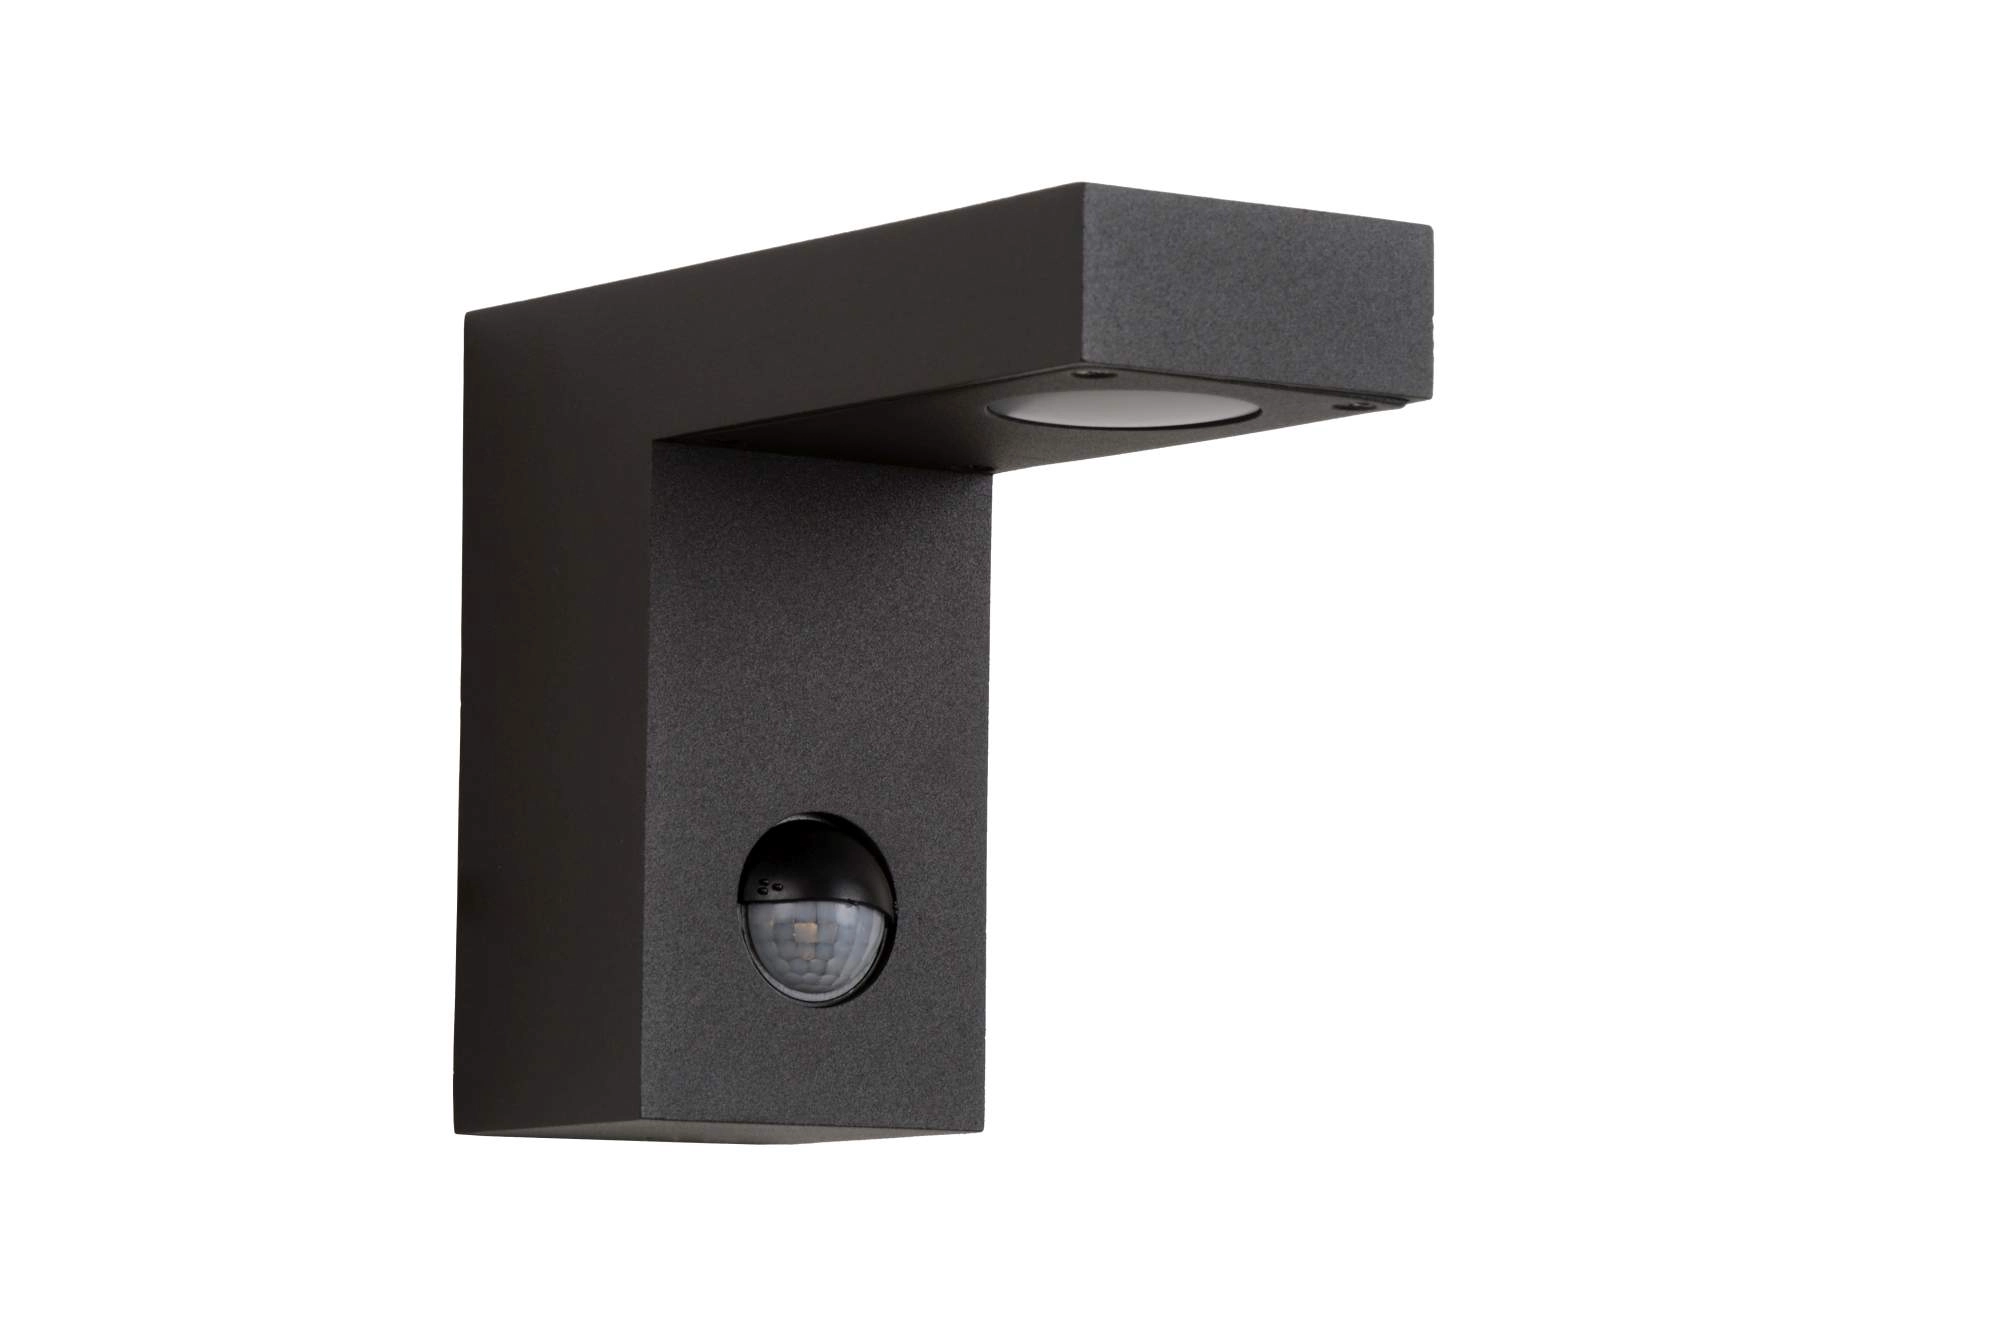 LU 28850/24/30 Lucide TEXAS-IR - Wall spotlight Outdoor - LED - 1x7W 3000K - IP54 - Anthracite